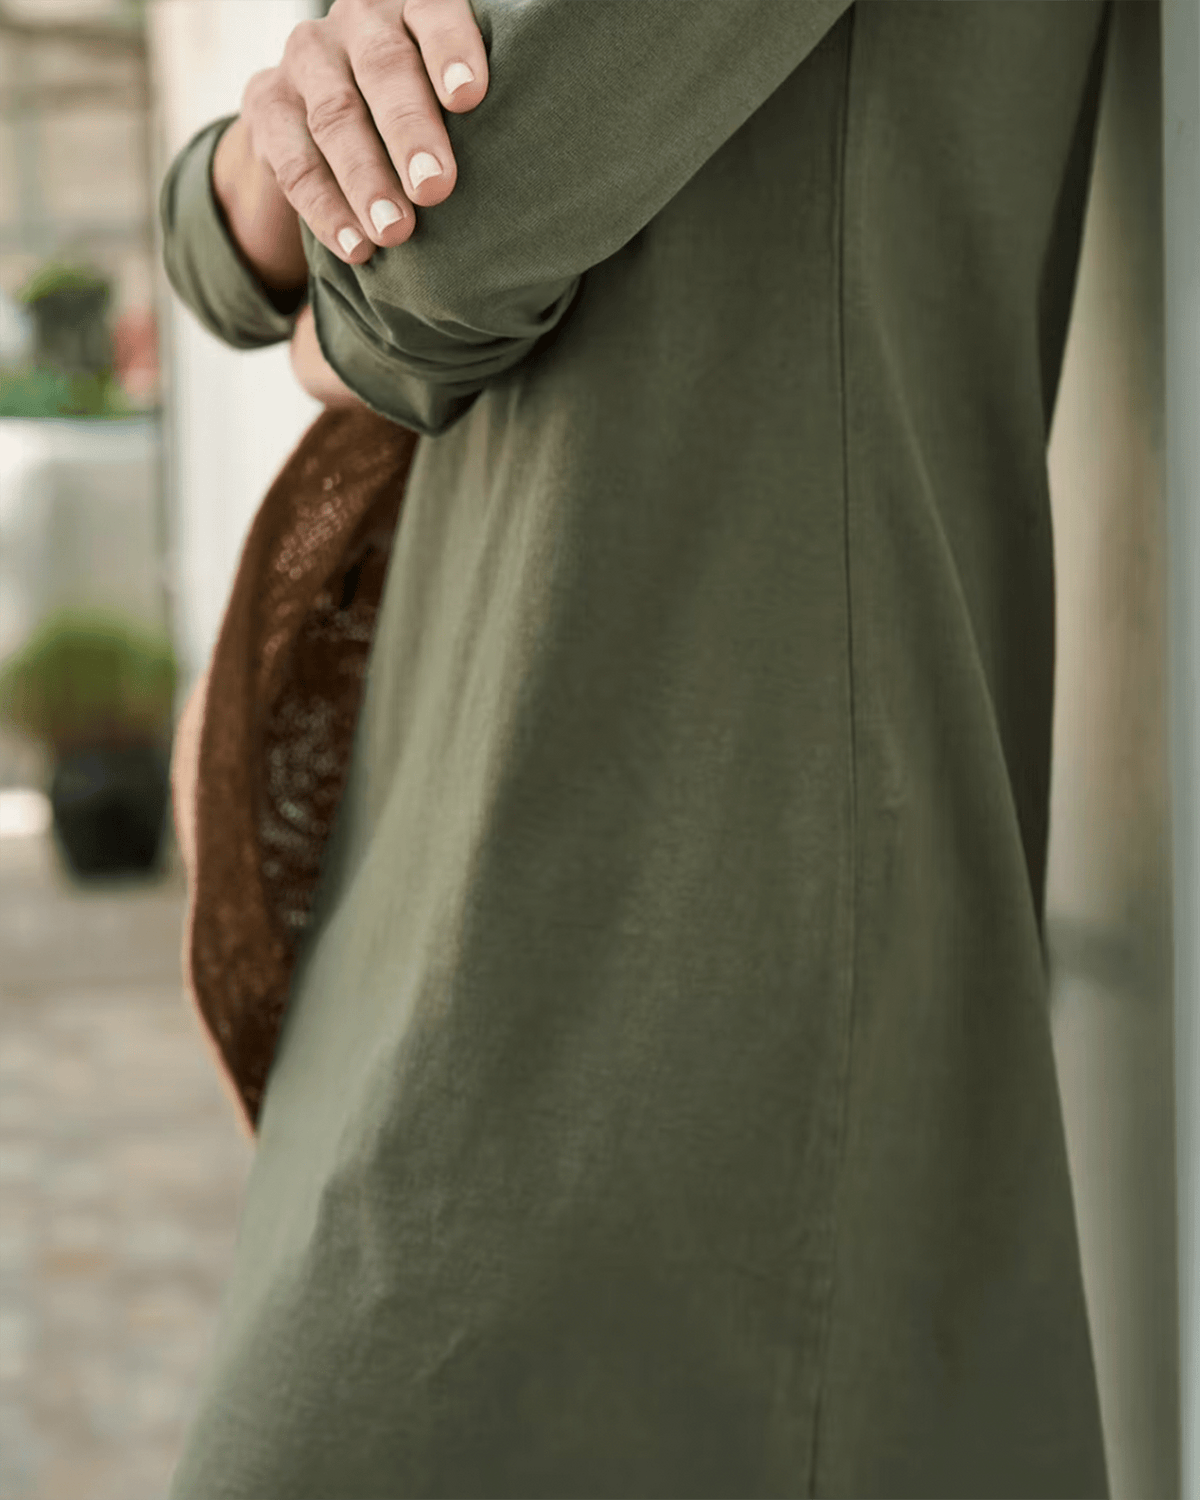 Tee Lab Clothing Long Sleeve Polo Dress in Army Green